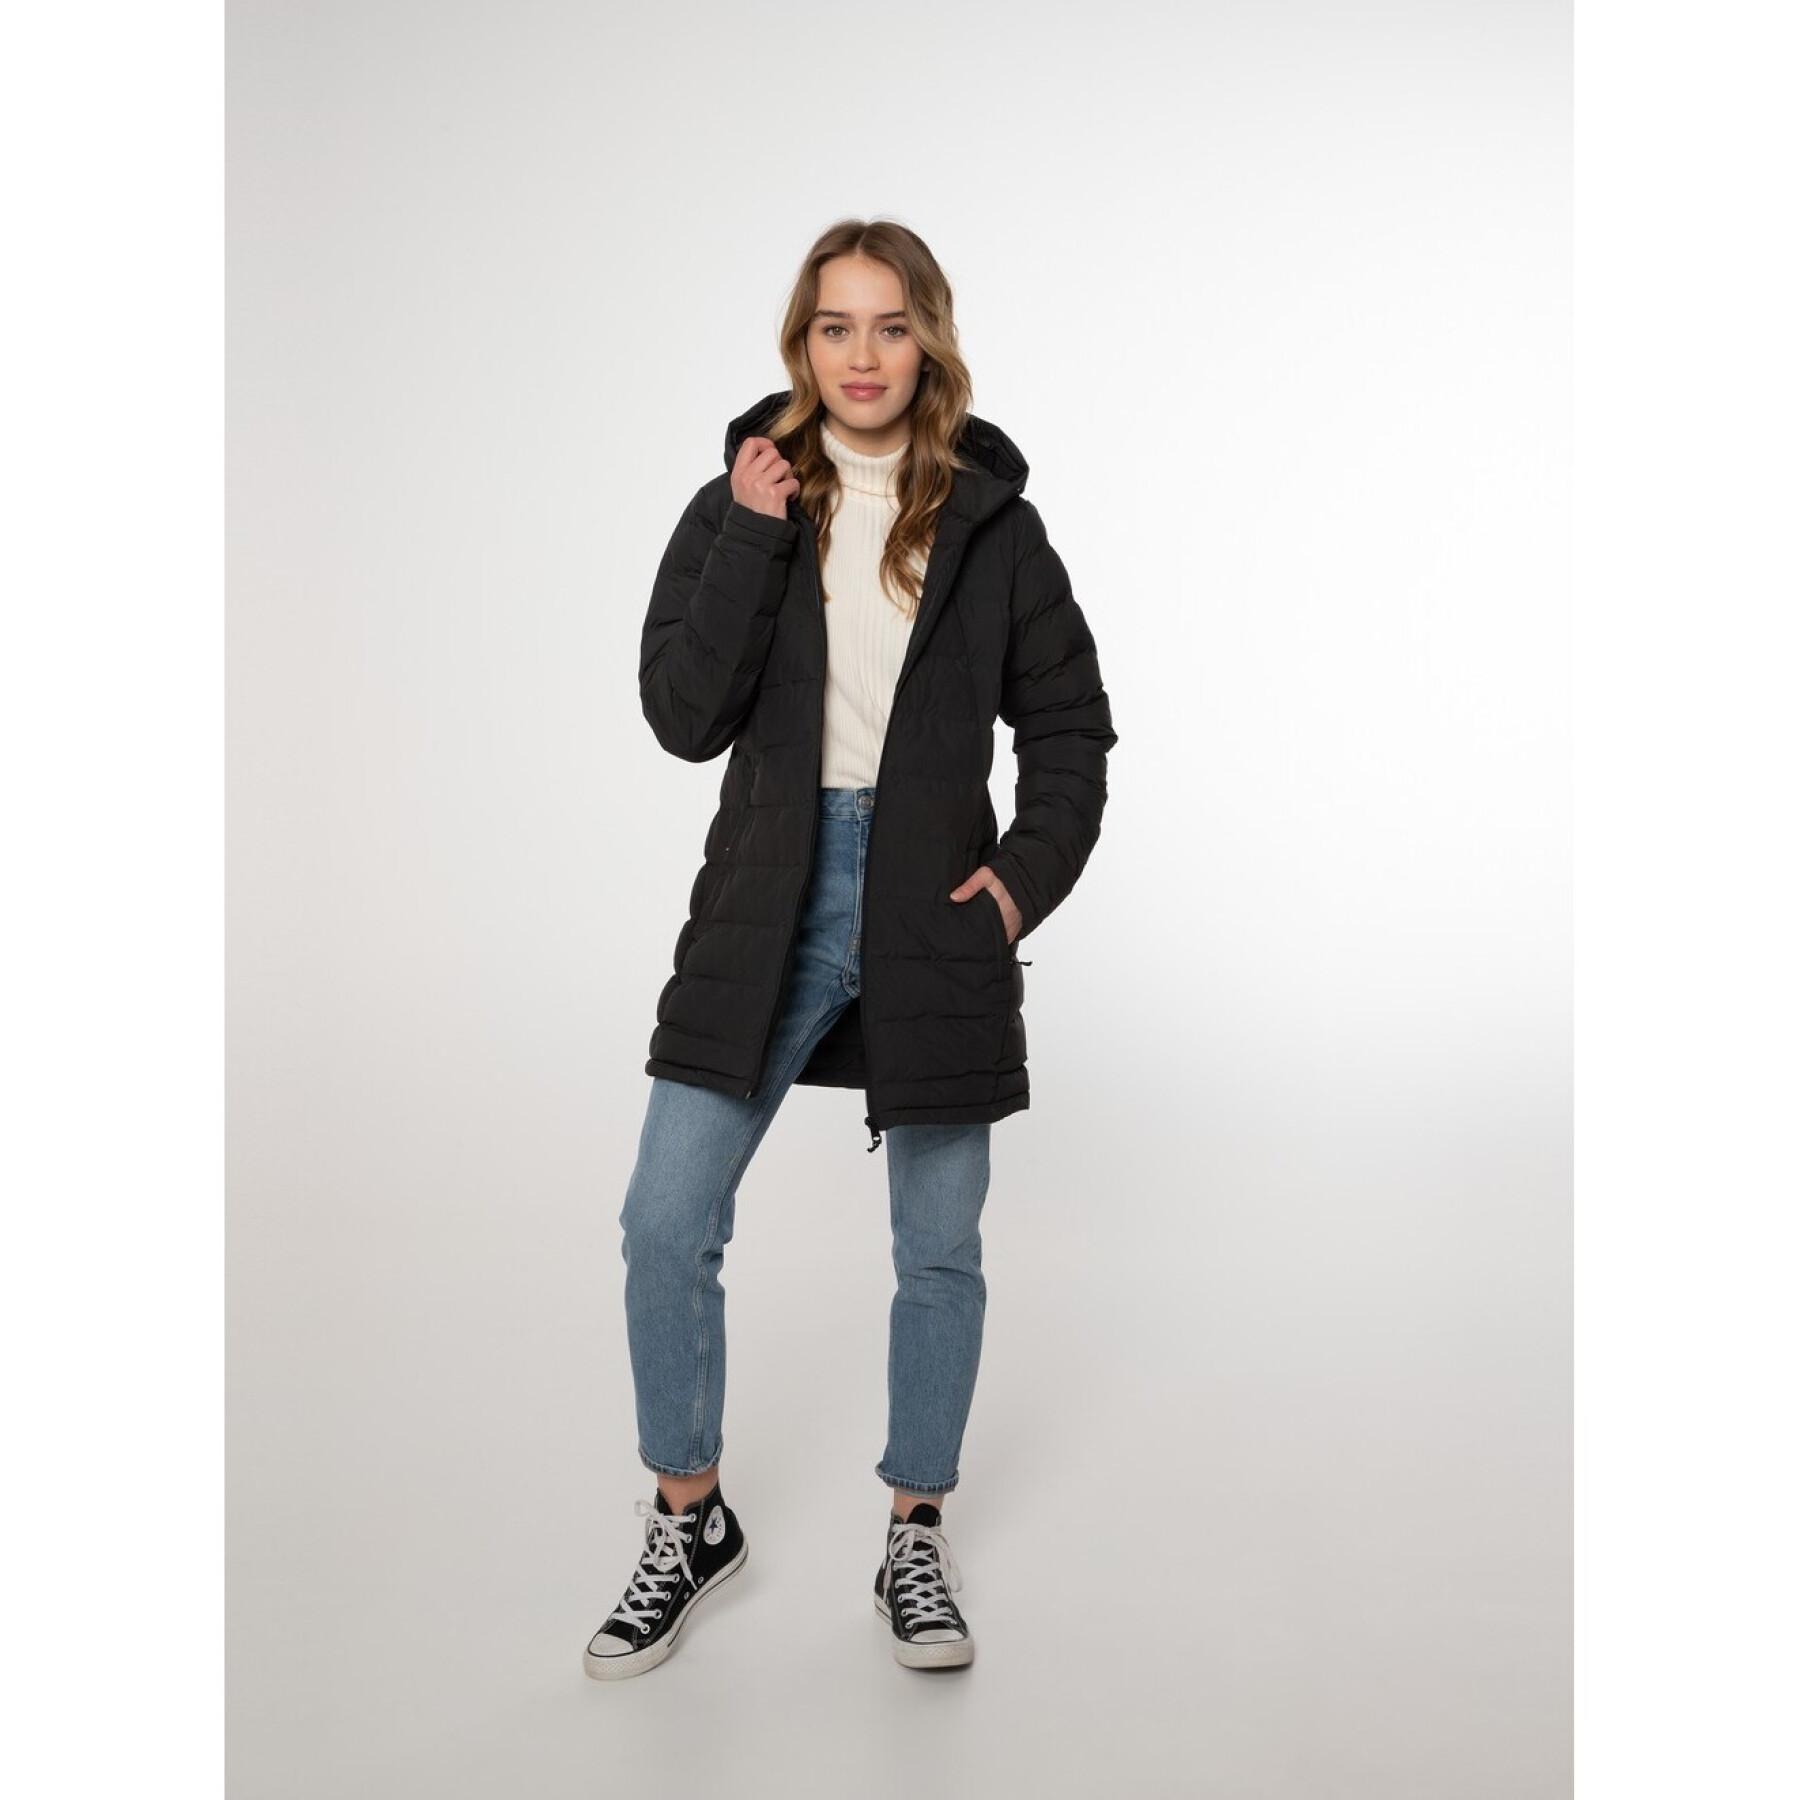 Chaqueta impermeable outdoor para mujer Protest Bloom